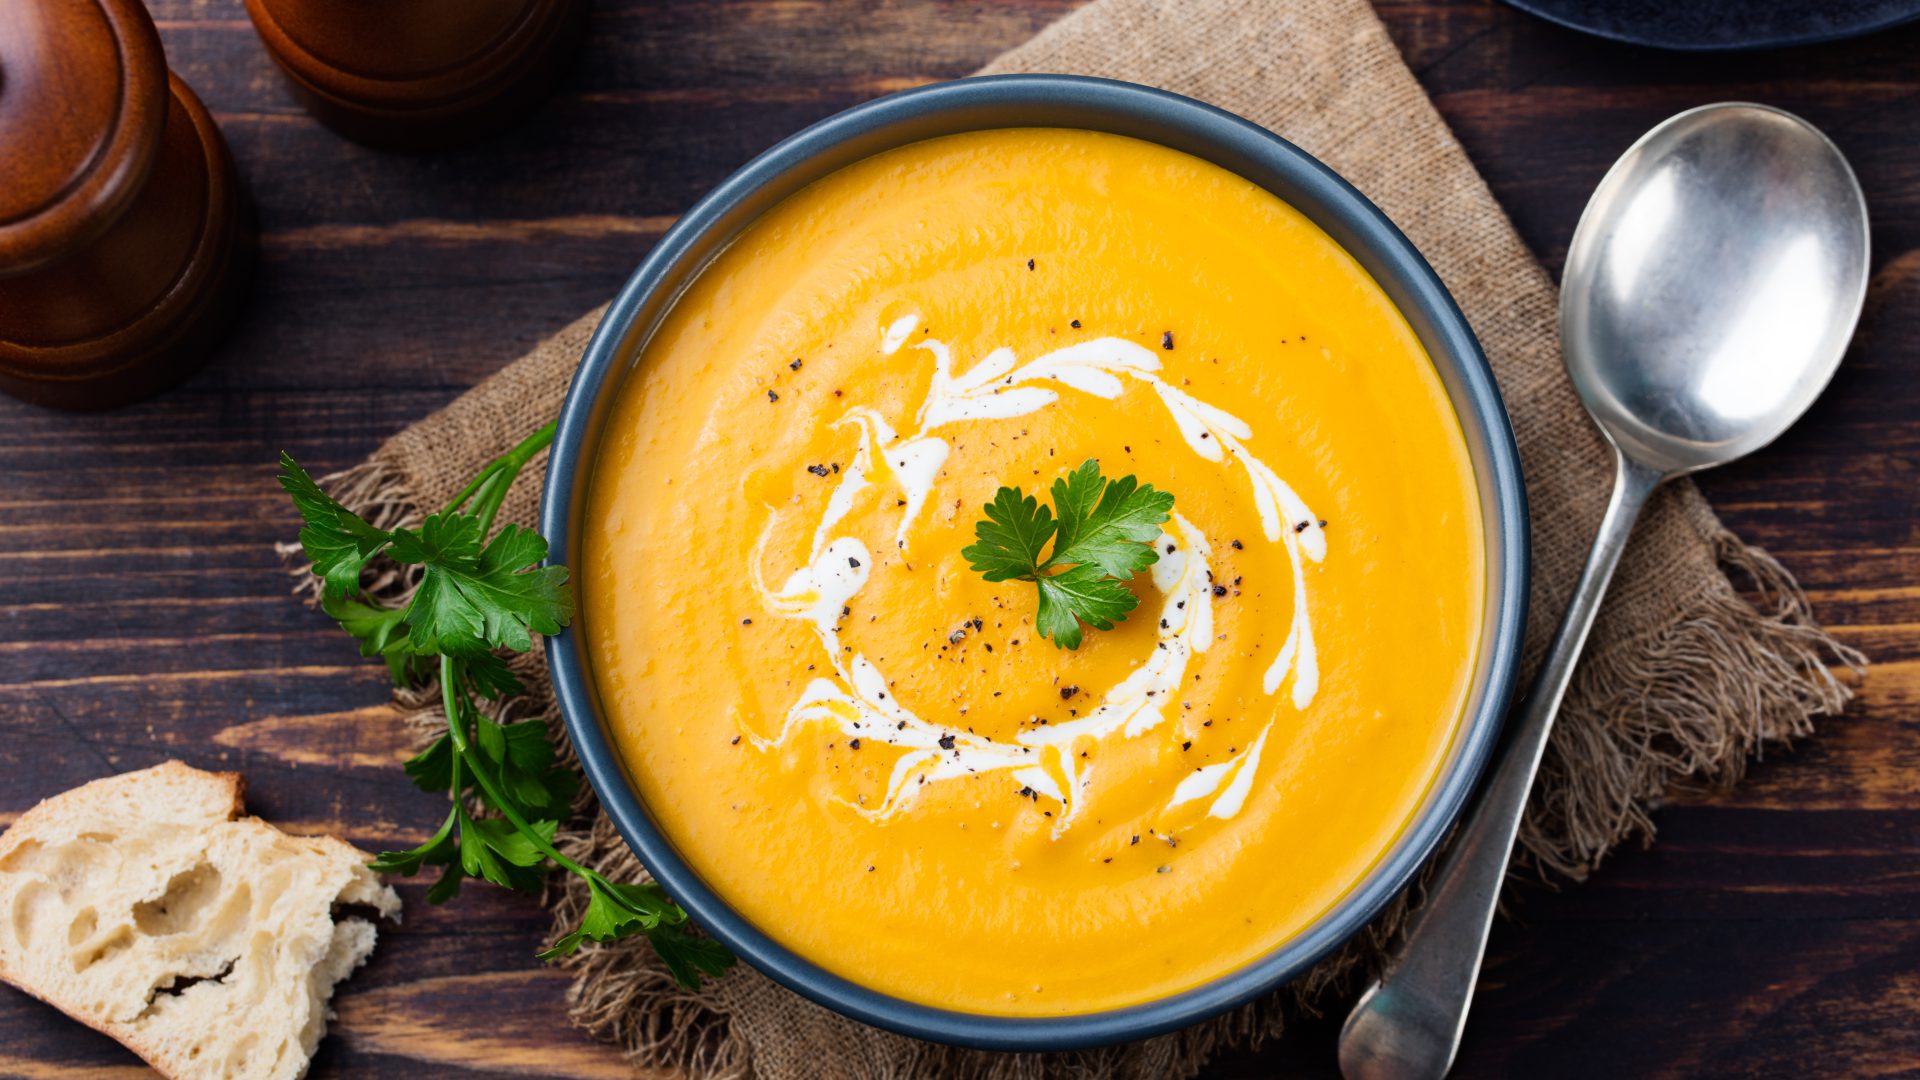 Warming Autumn Recipes to Enjoy in your ABI